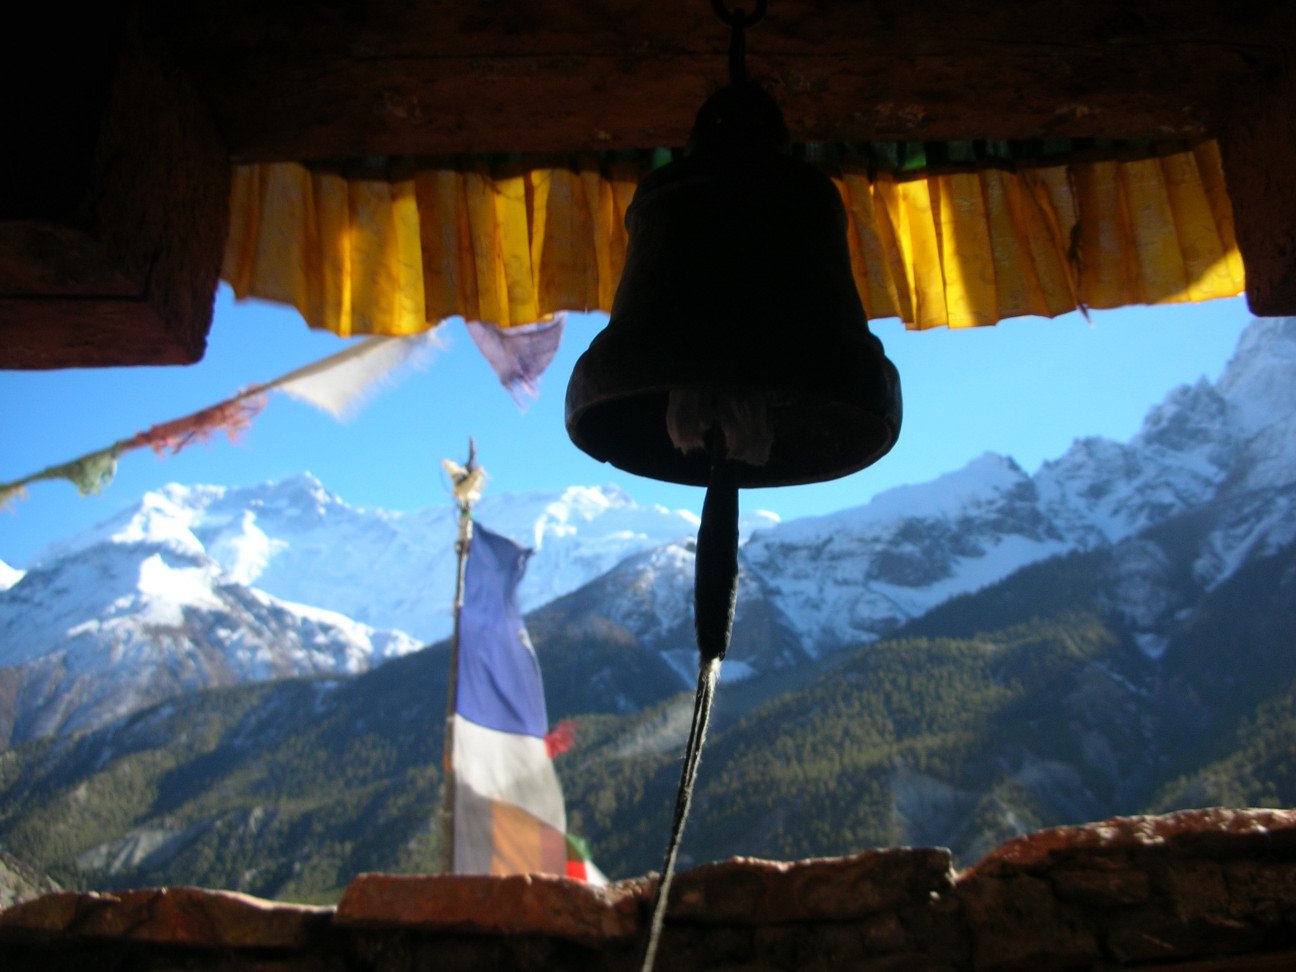 PRAYER FLAGS, MOUNTAINS AND BELLS - EVERYWHERE.